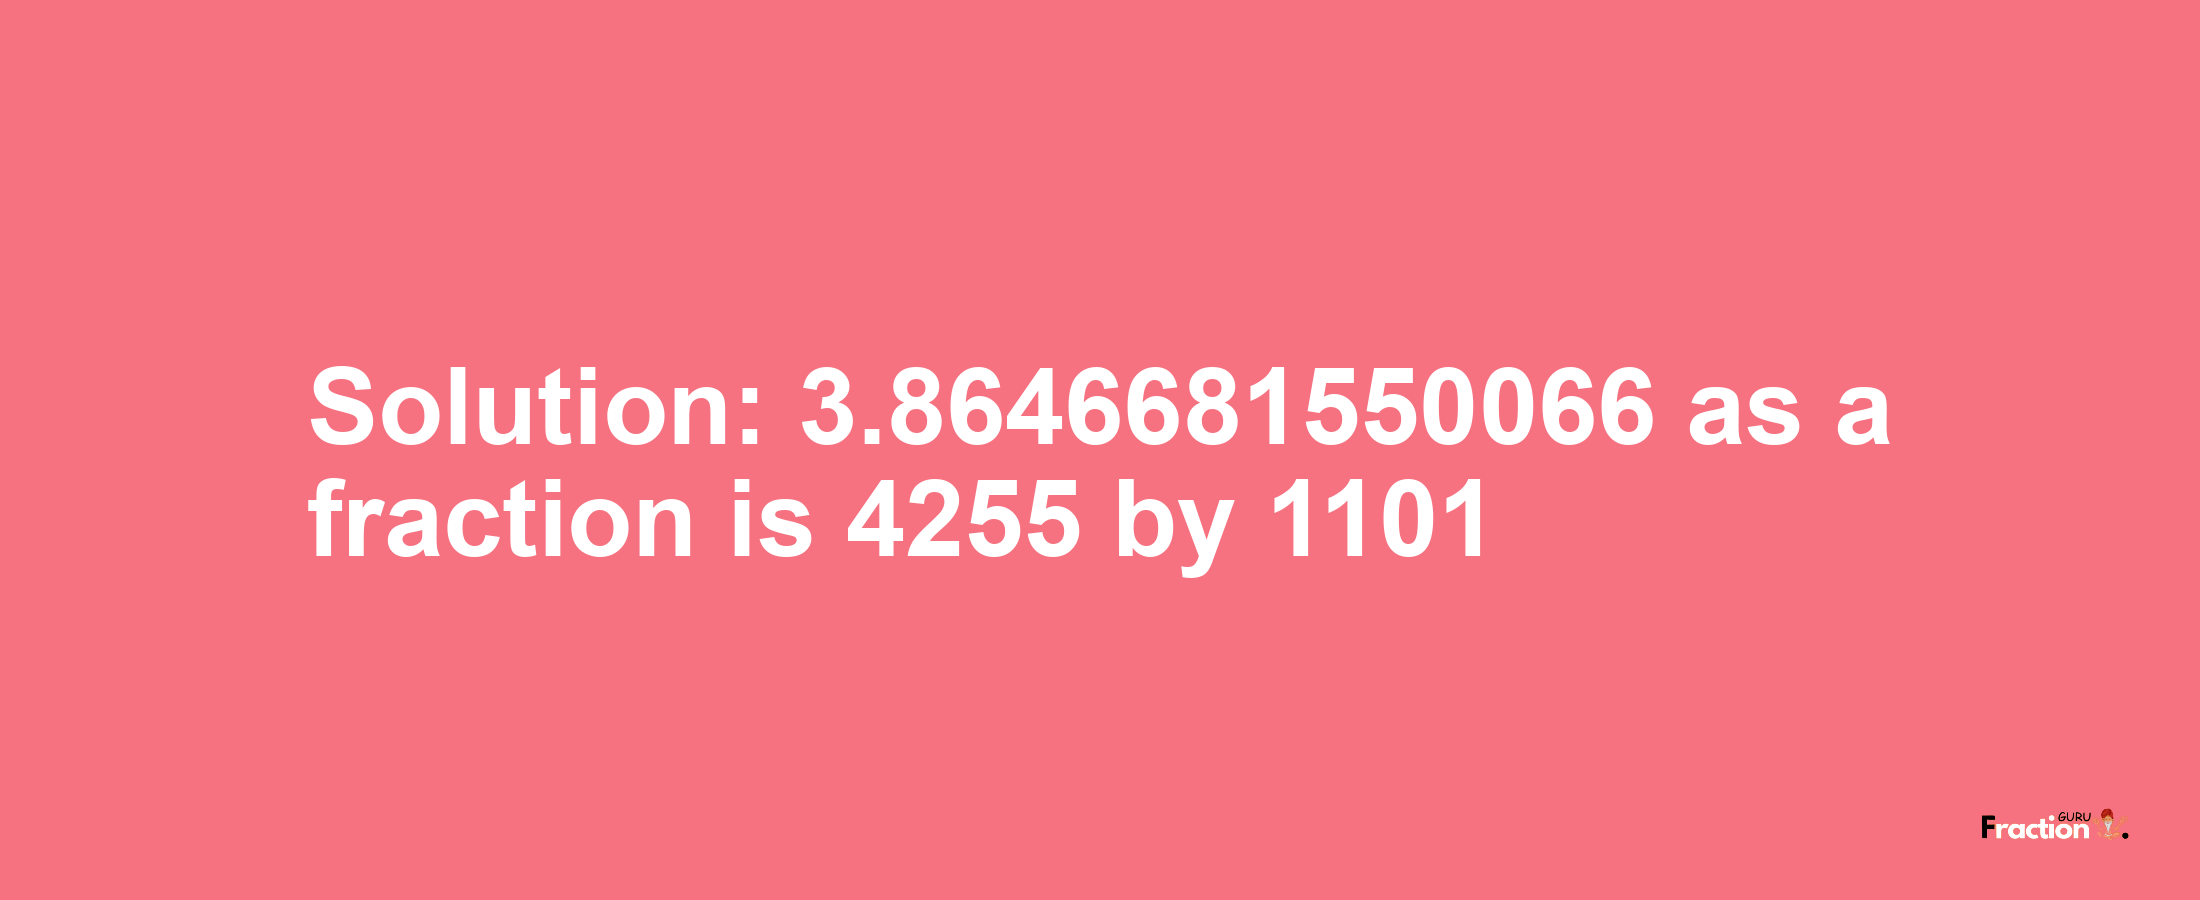 Solution:3.8646681550066 as a fraction is 4255/1101